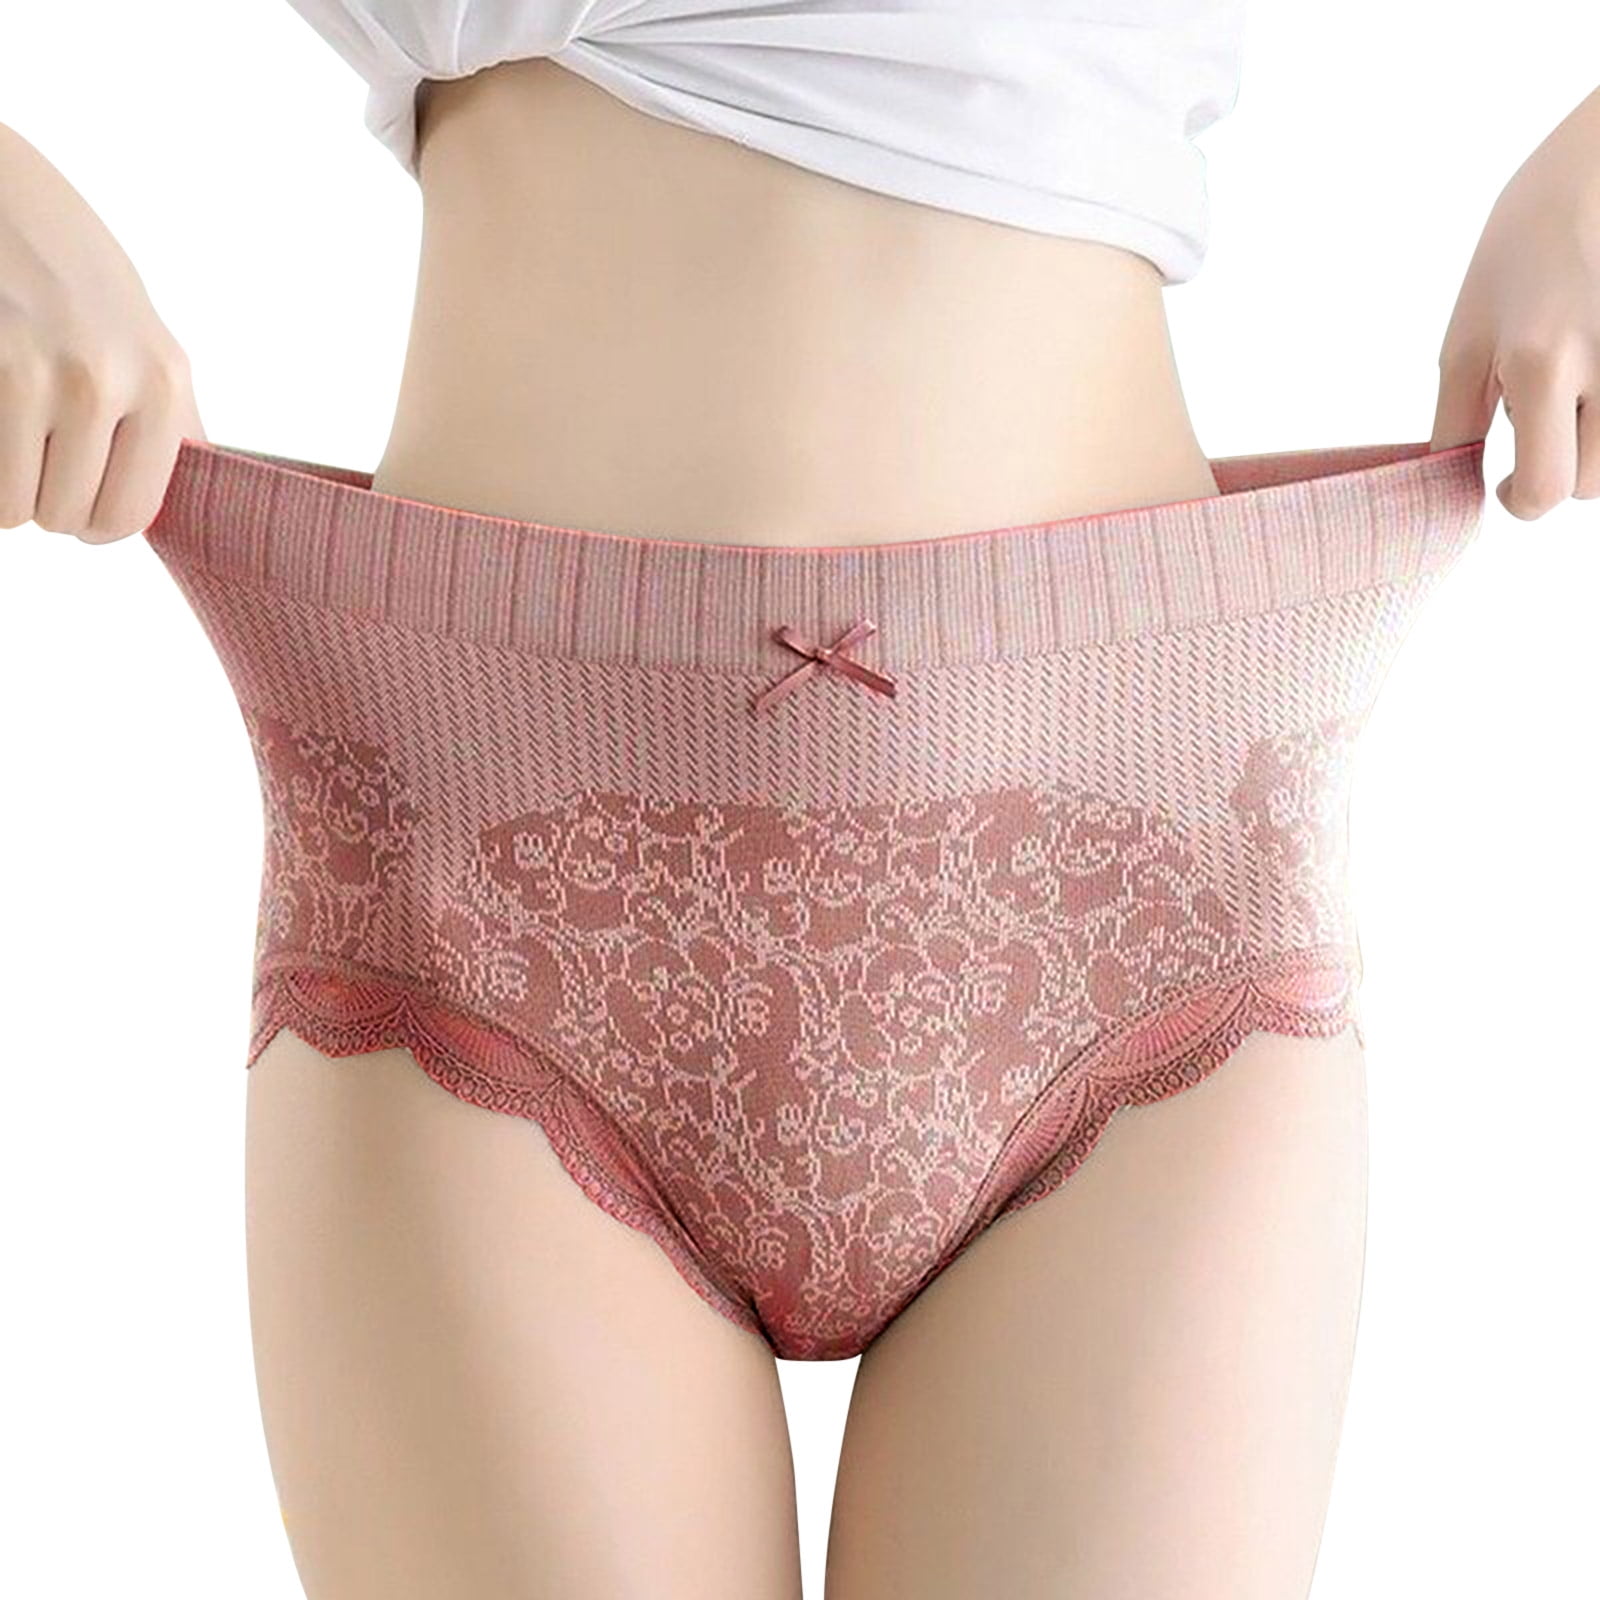 PMUYBHF Plus Size Underwear for Women 3X Cotton Panties for Women Crochet  Lace up Panty Hollow Out Underwear Underwear Women Cotton High Waist 